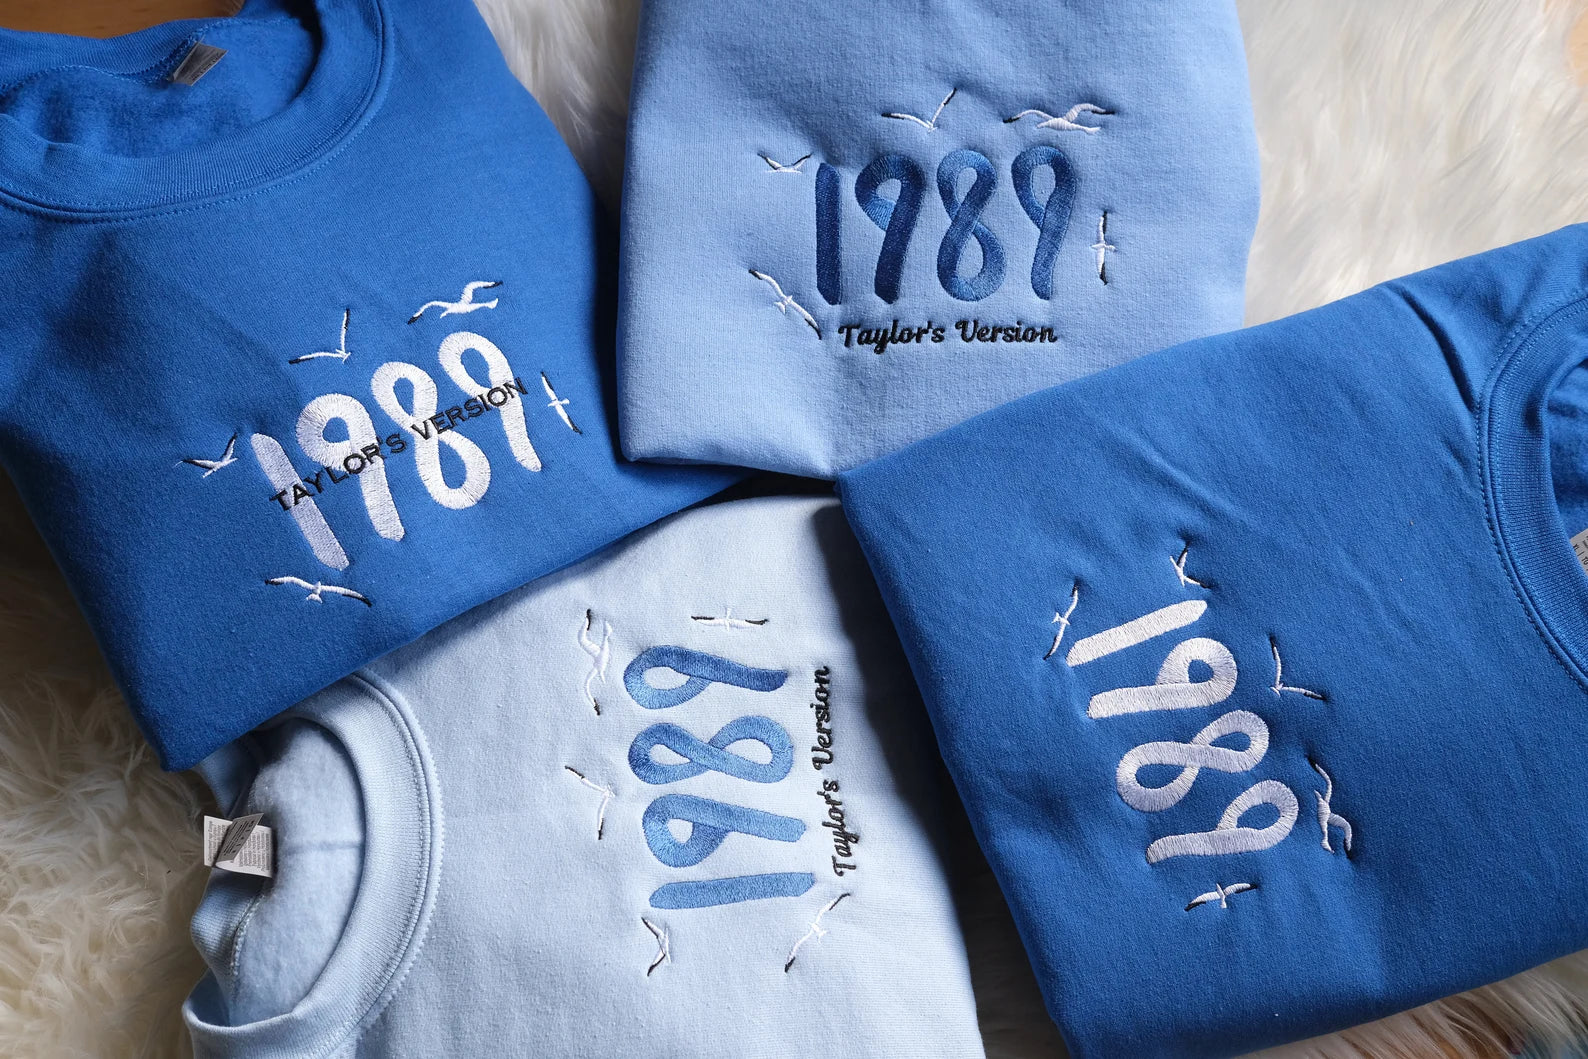 1989 Taylor's Version Embroidered Crewneck & Hoodie